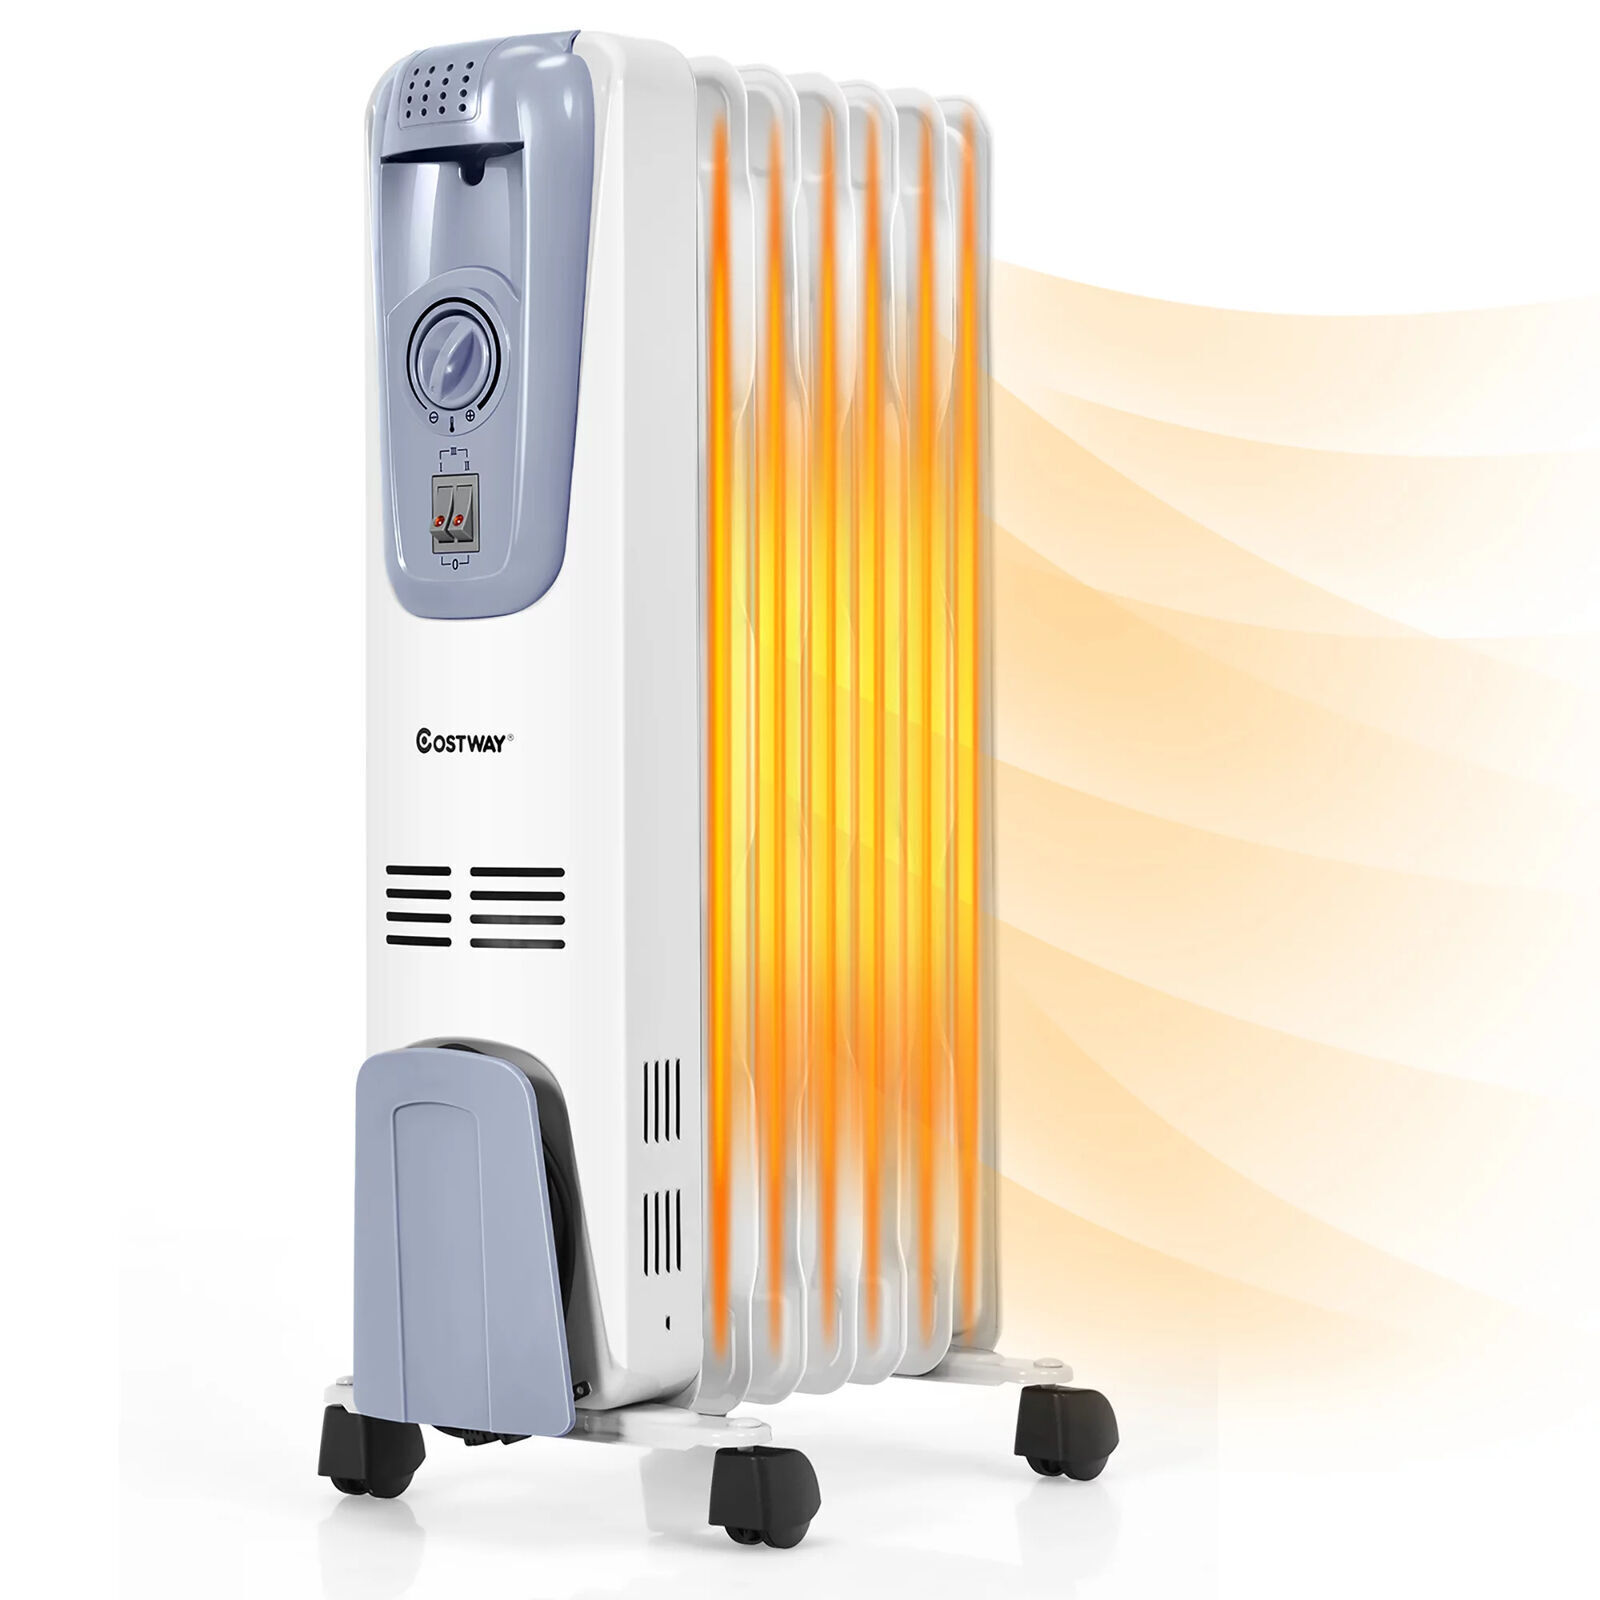 Costway 1500W Electric Oil Filled Radiator Space Heater 7-Fin Thermostat